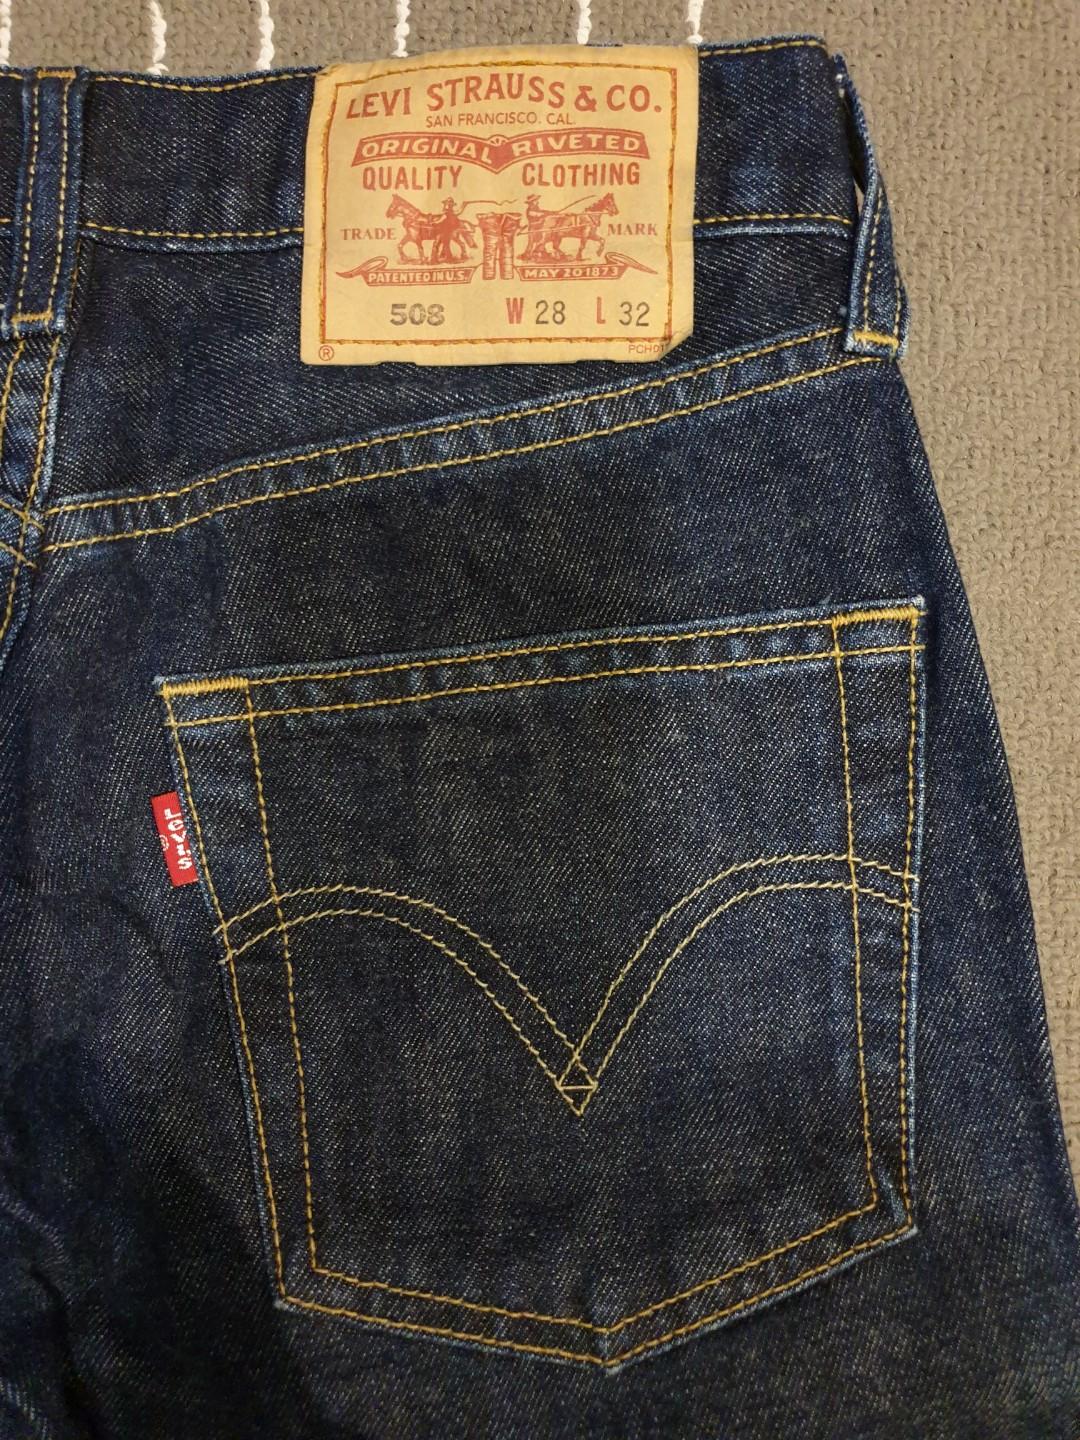 size 28 in levis